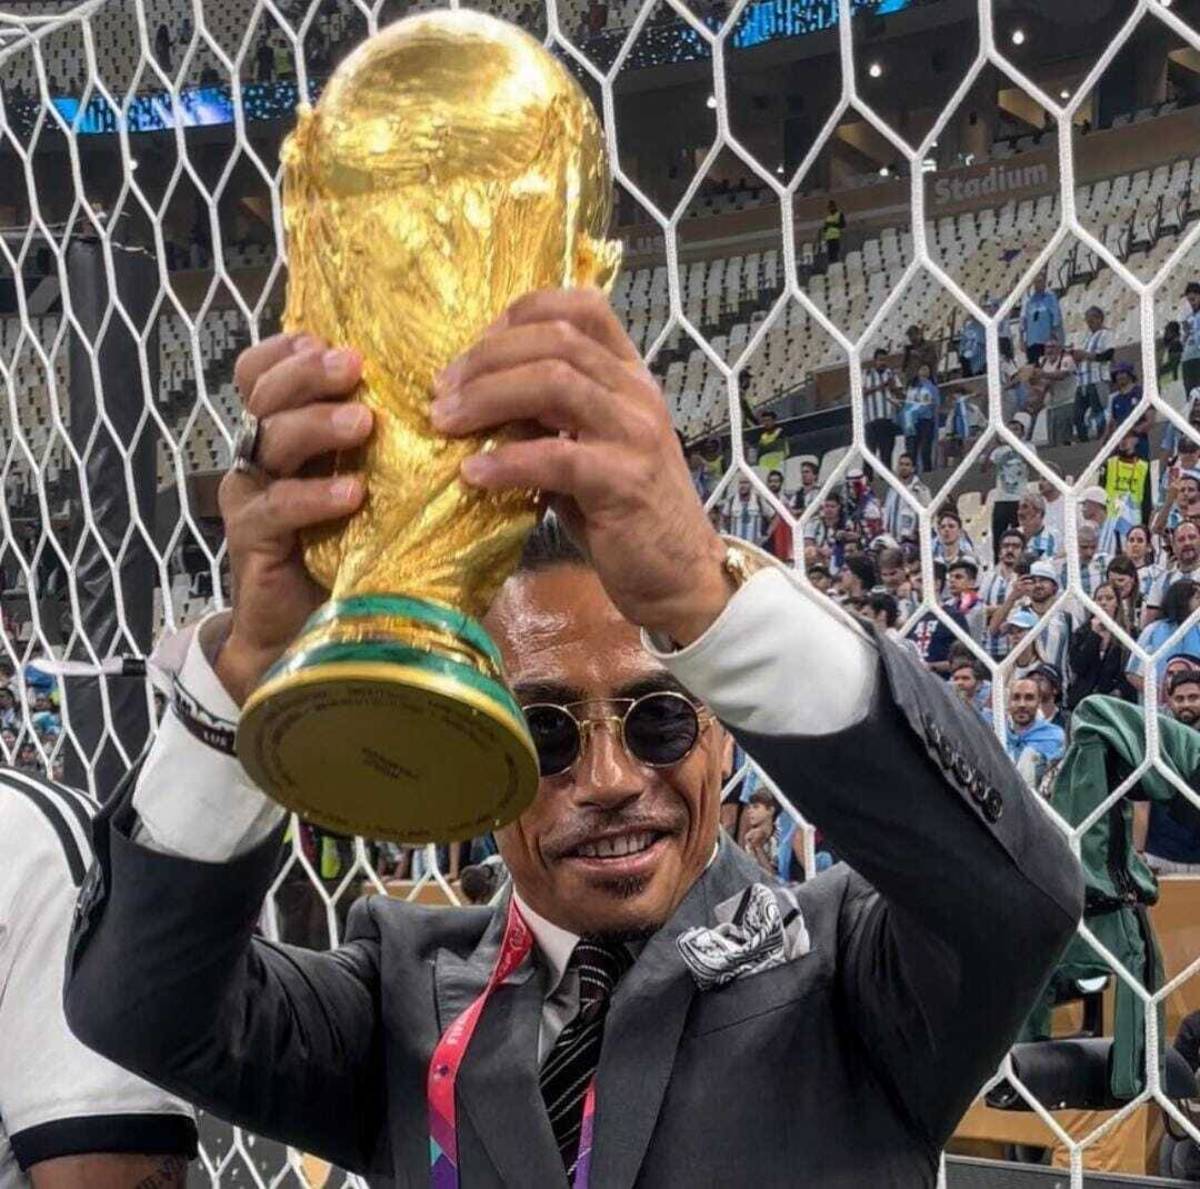 Salt Bae, aka Nusret Gokce, pictured holding the World Cup trophy after invading the pitch at Lusail Stadium following the 2022 final